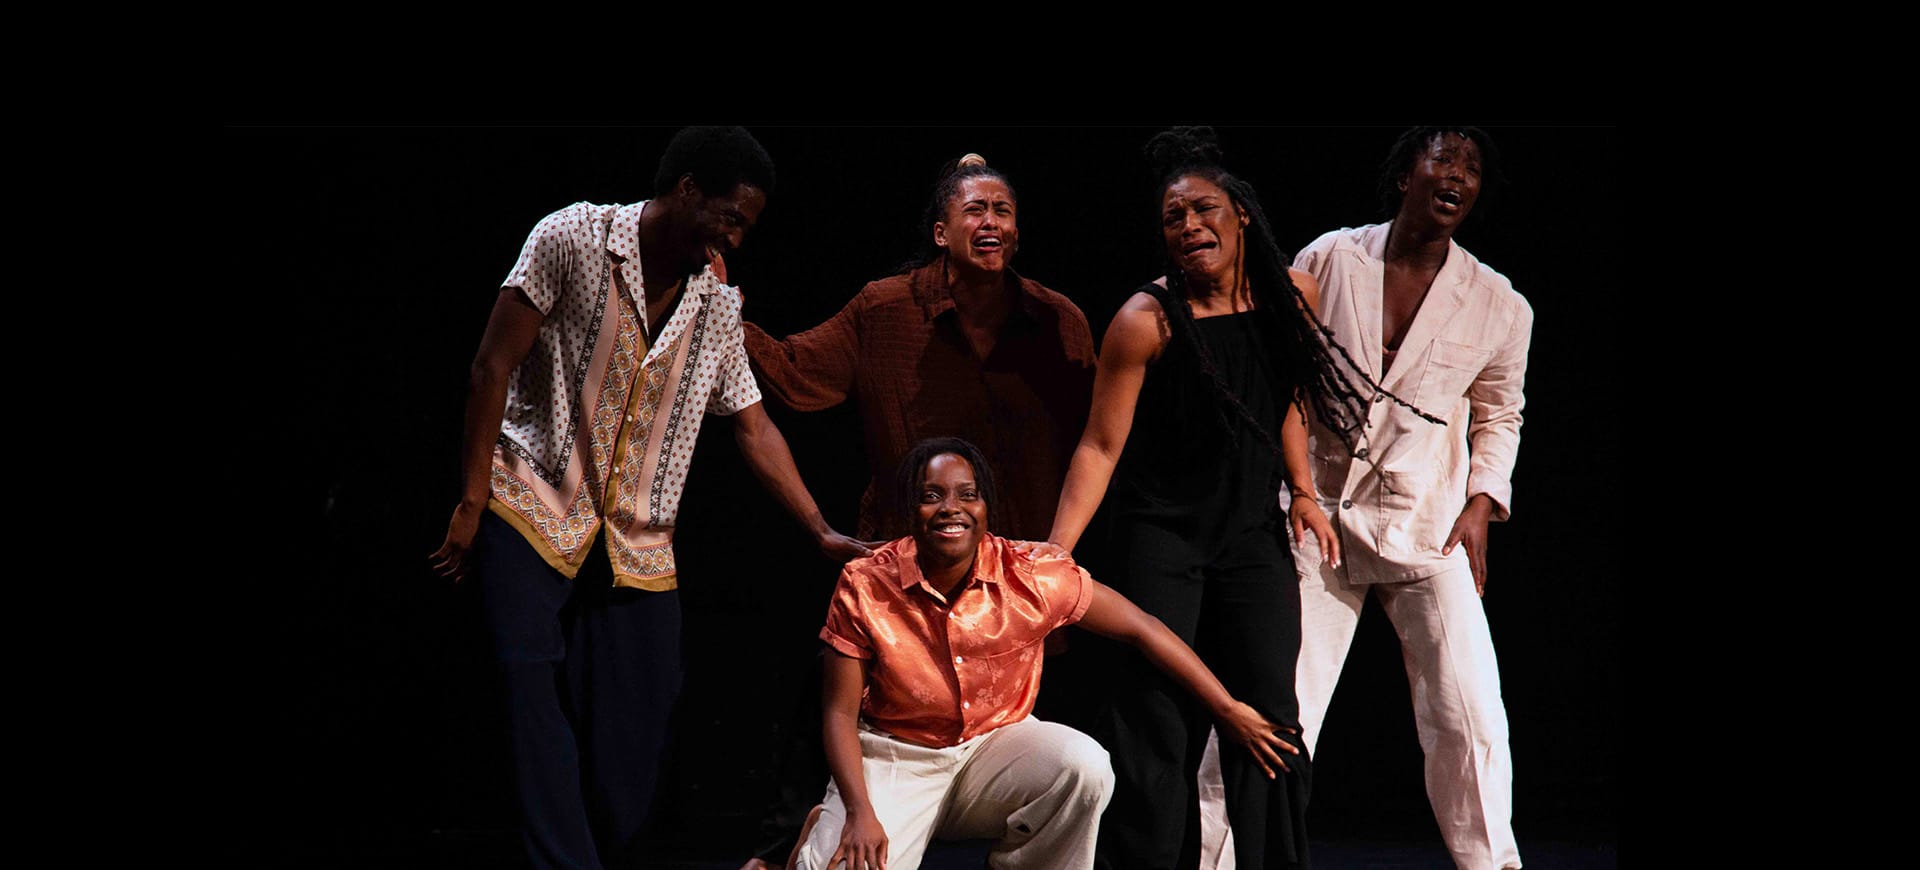 A group of dancers on stage showing a range of emotions